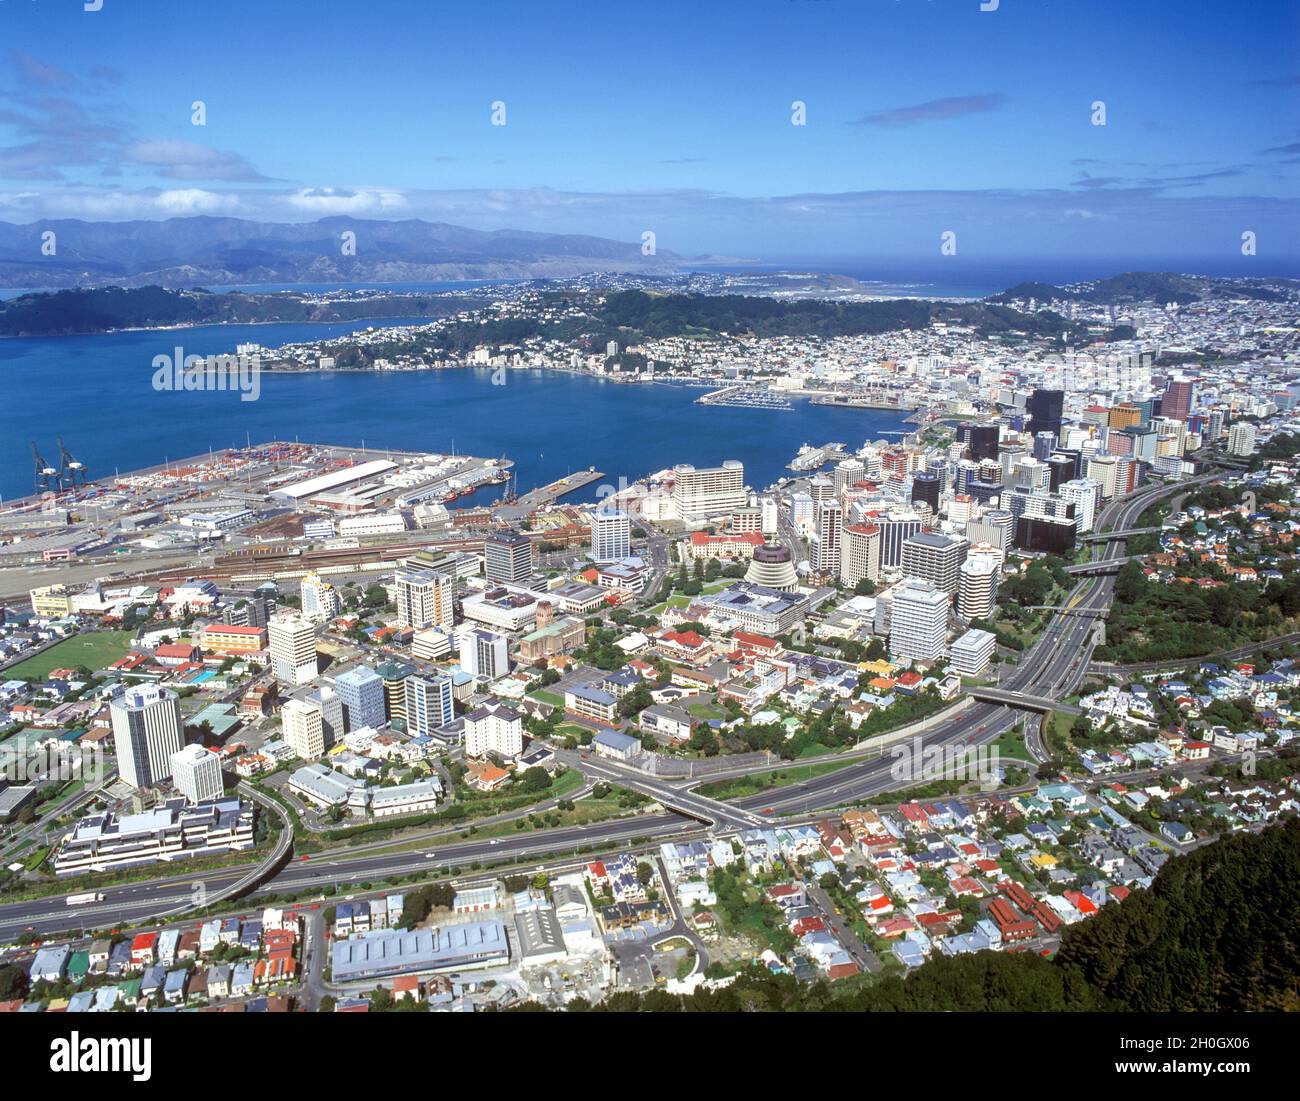 Collection 105+ Images wellington is the capital city of which pacific nation Superb